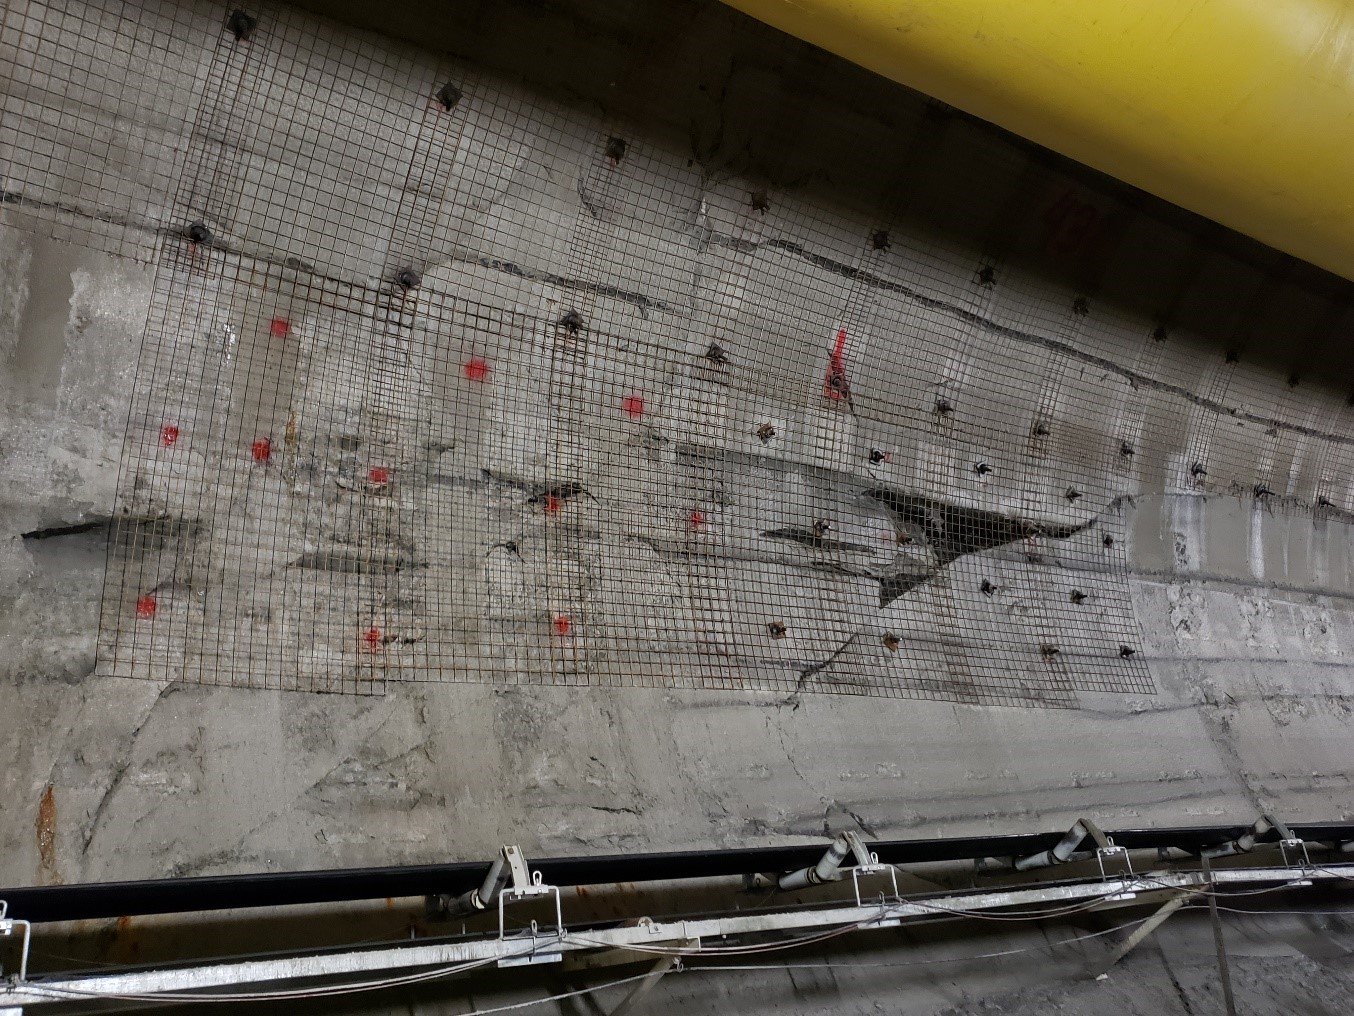 August 2021 - Additional Support on the Left Rib in the 32.58-ft Diameter Tunnel